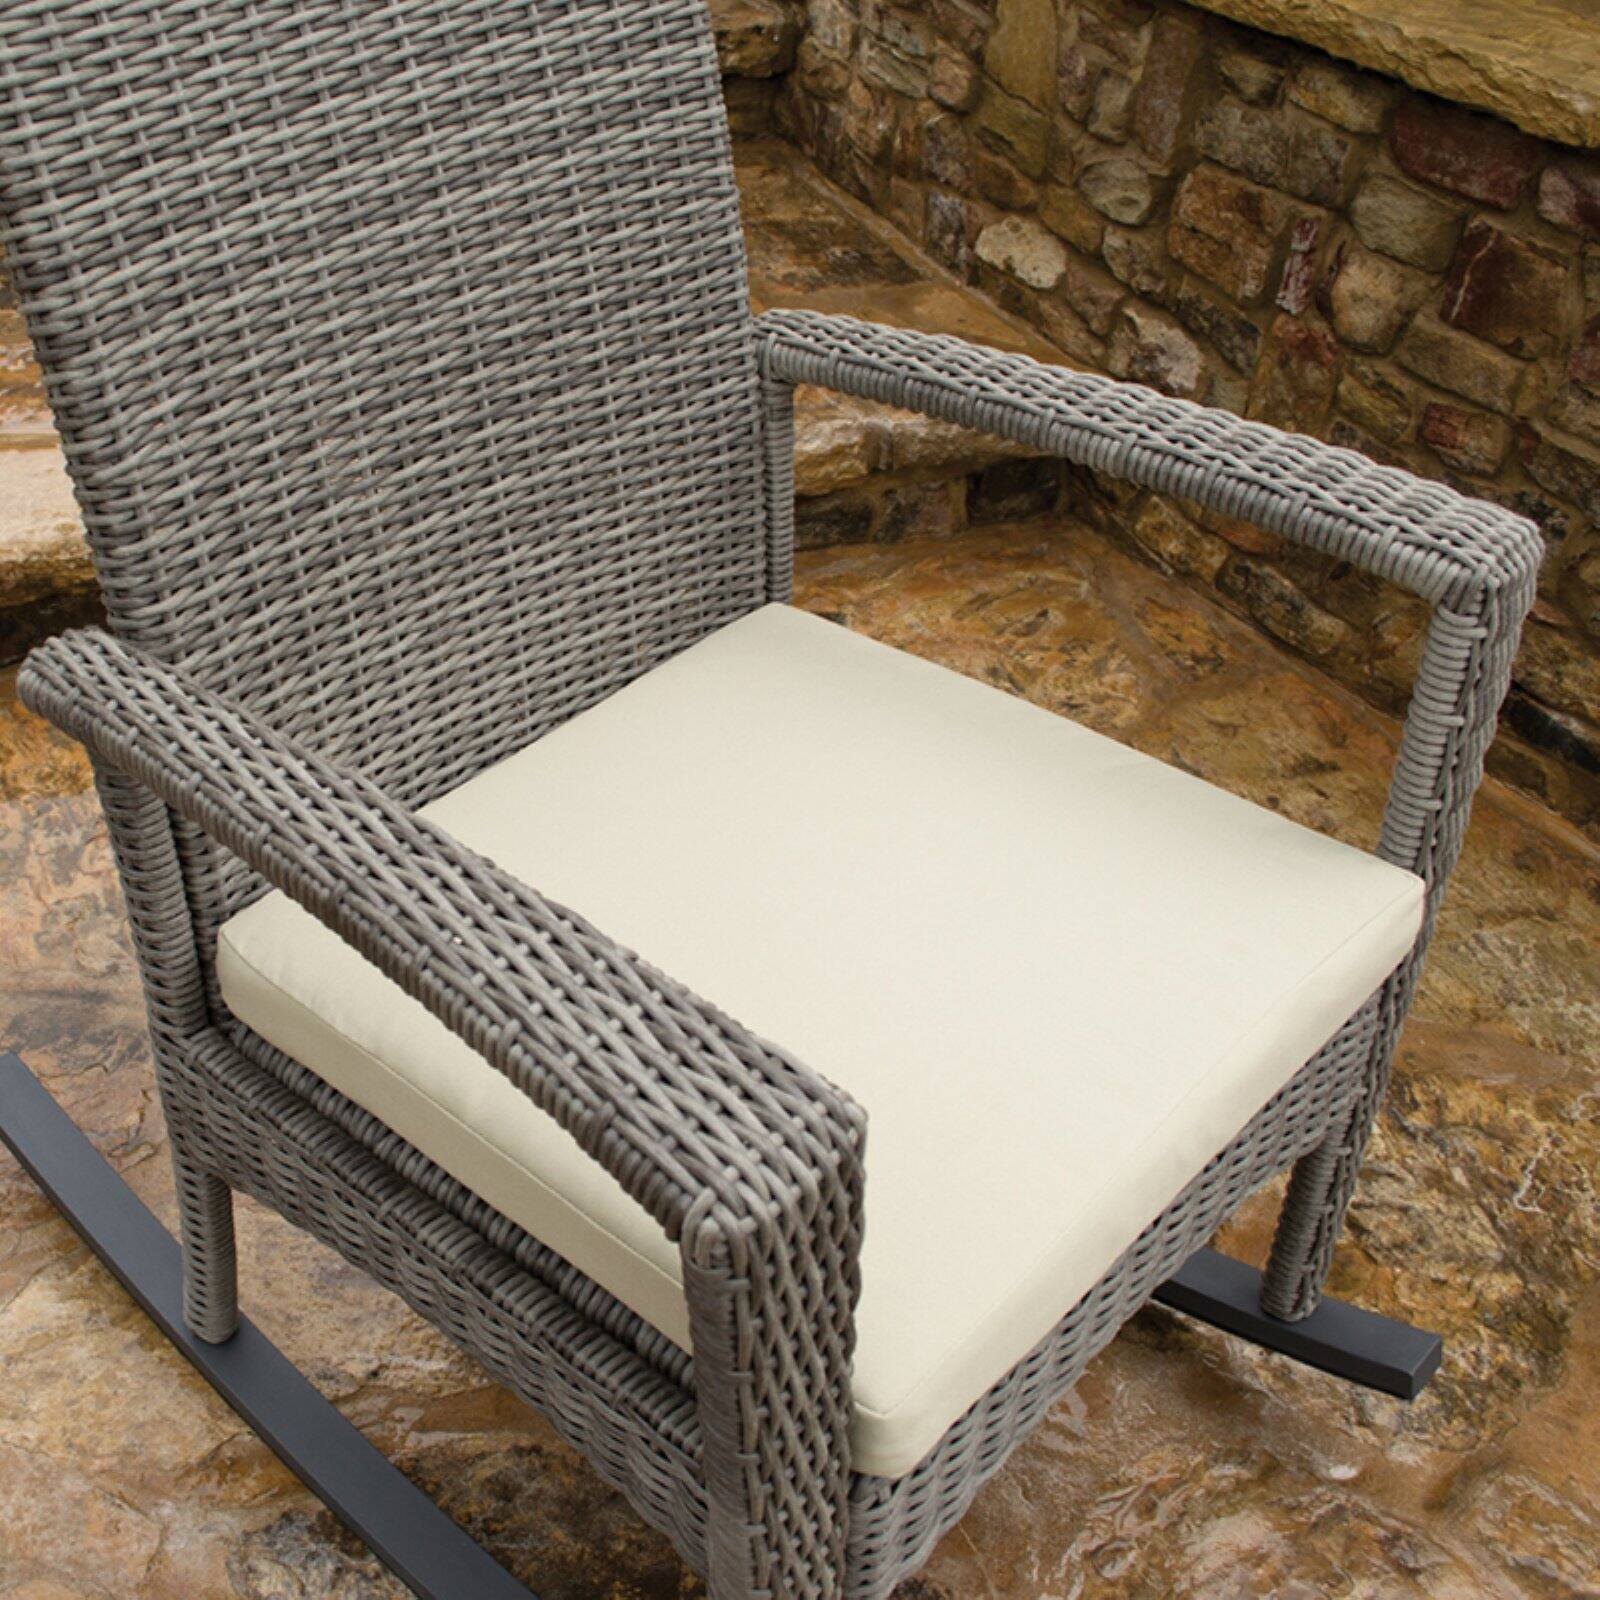 Tortuga Outdoor Bayview Rocking Chair and Side Table - image 4 of 5